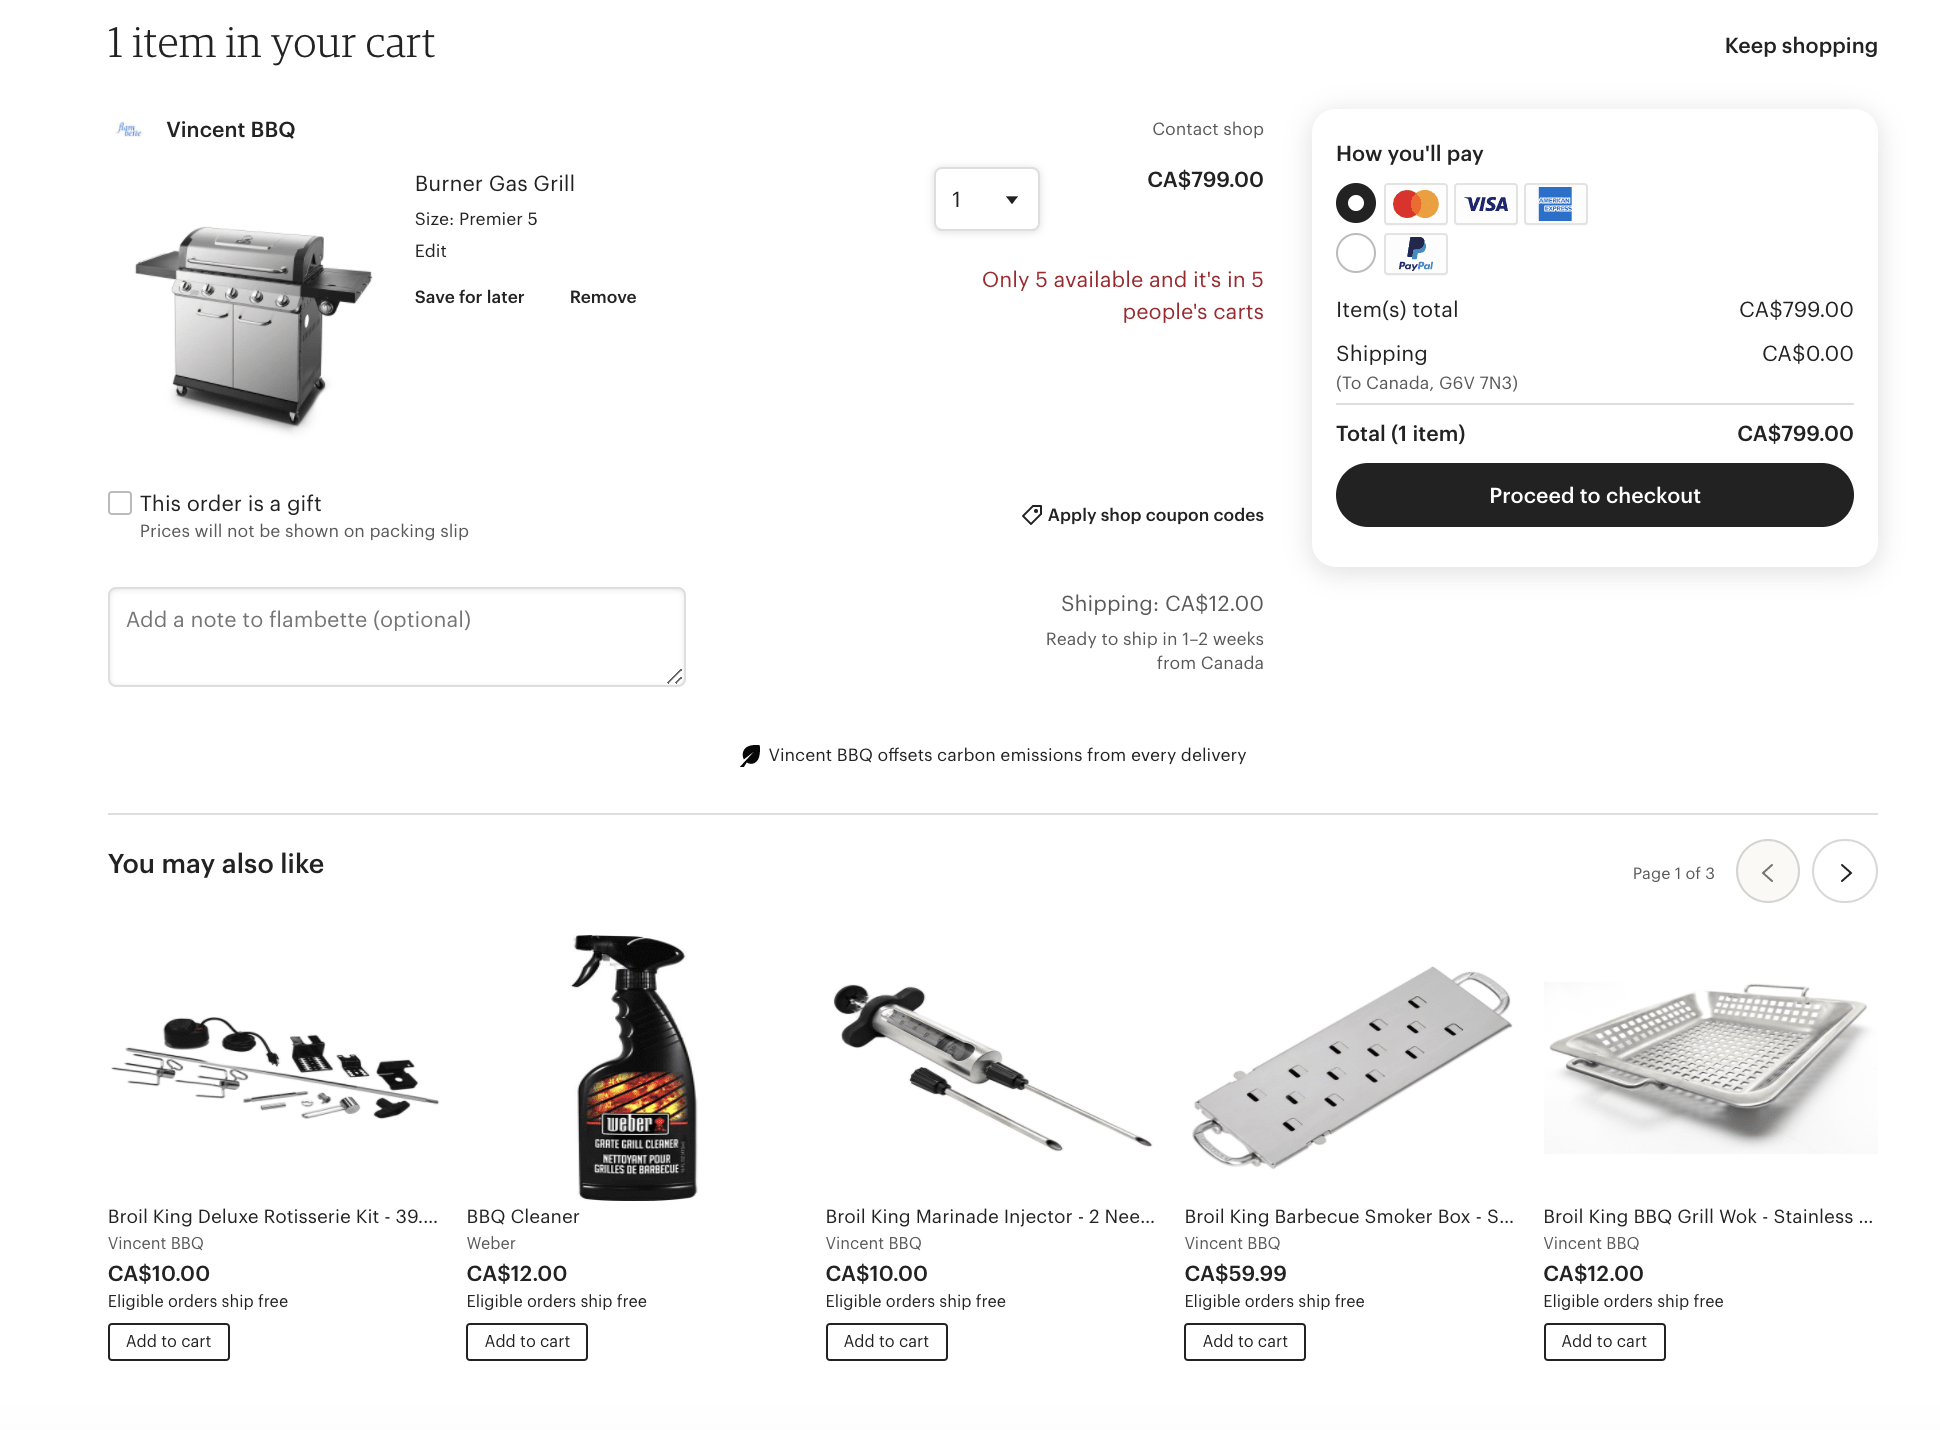 Product recommendation example on shopping cart page - more suggestions.